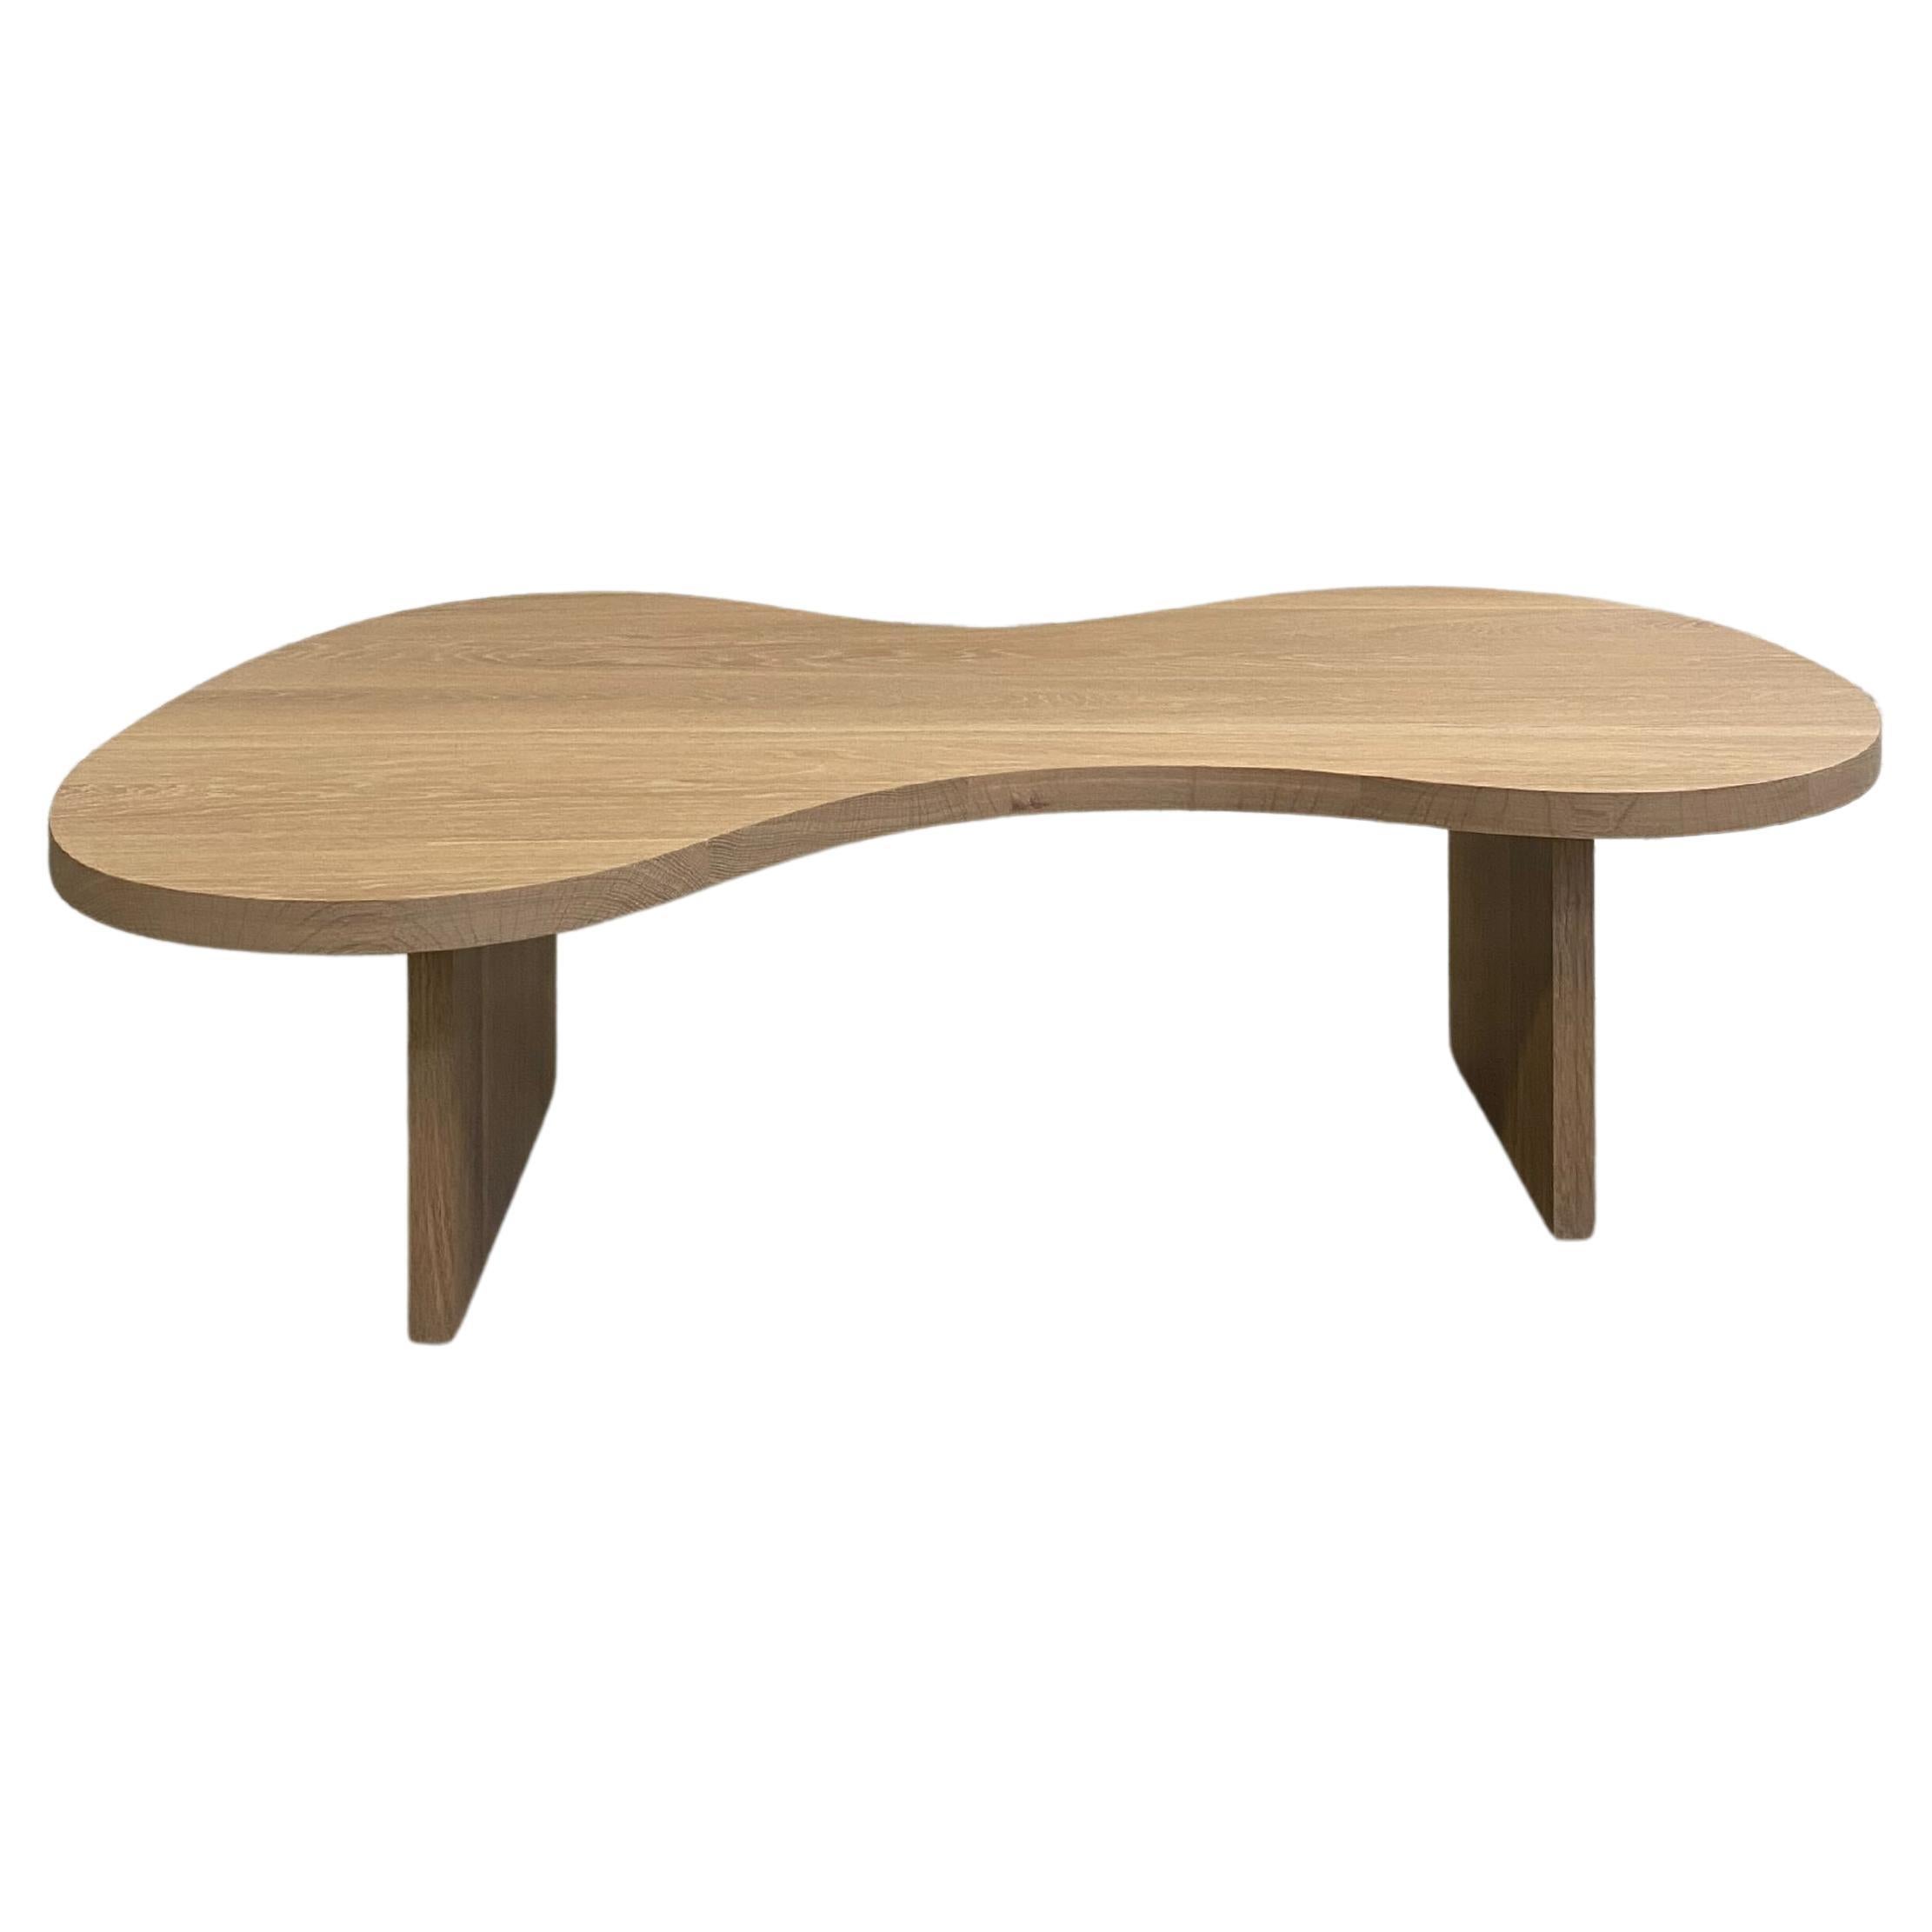 Organic Modern Solid White Oak Oiled Coffee Table by Mary Ratcliffe Studio 52"L For Sale